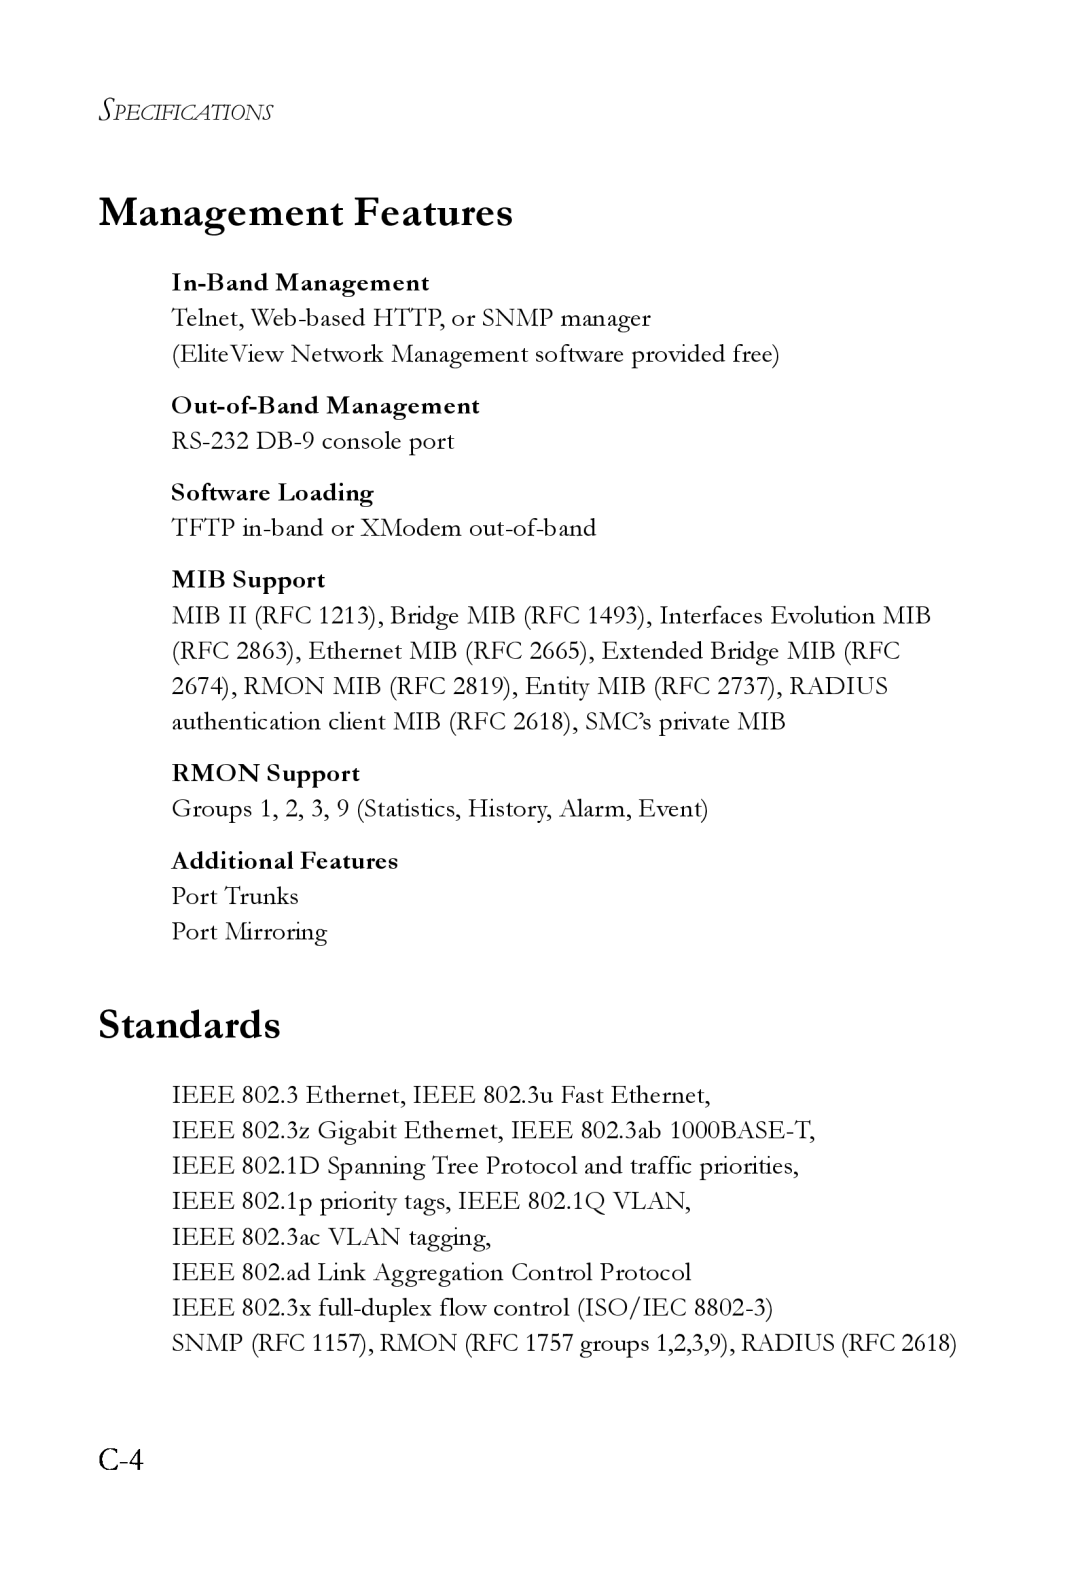 SMC Networks SMC8624T manual Management Features, Standards, In-Band Management, Out-of-Band Management, Software Loading 